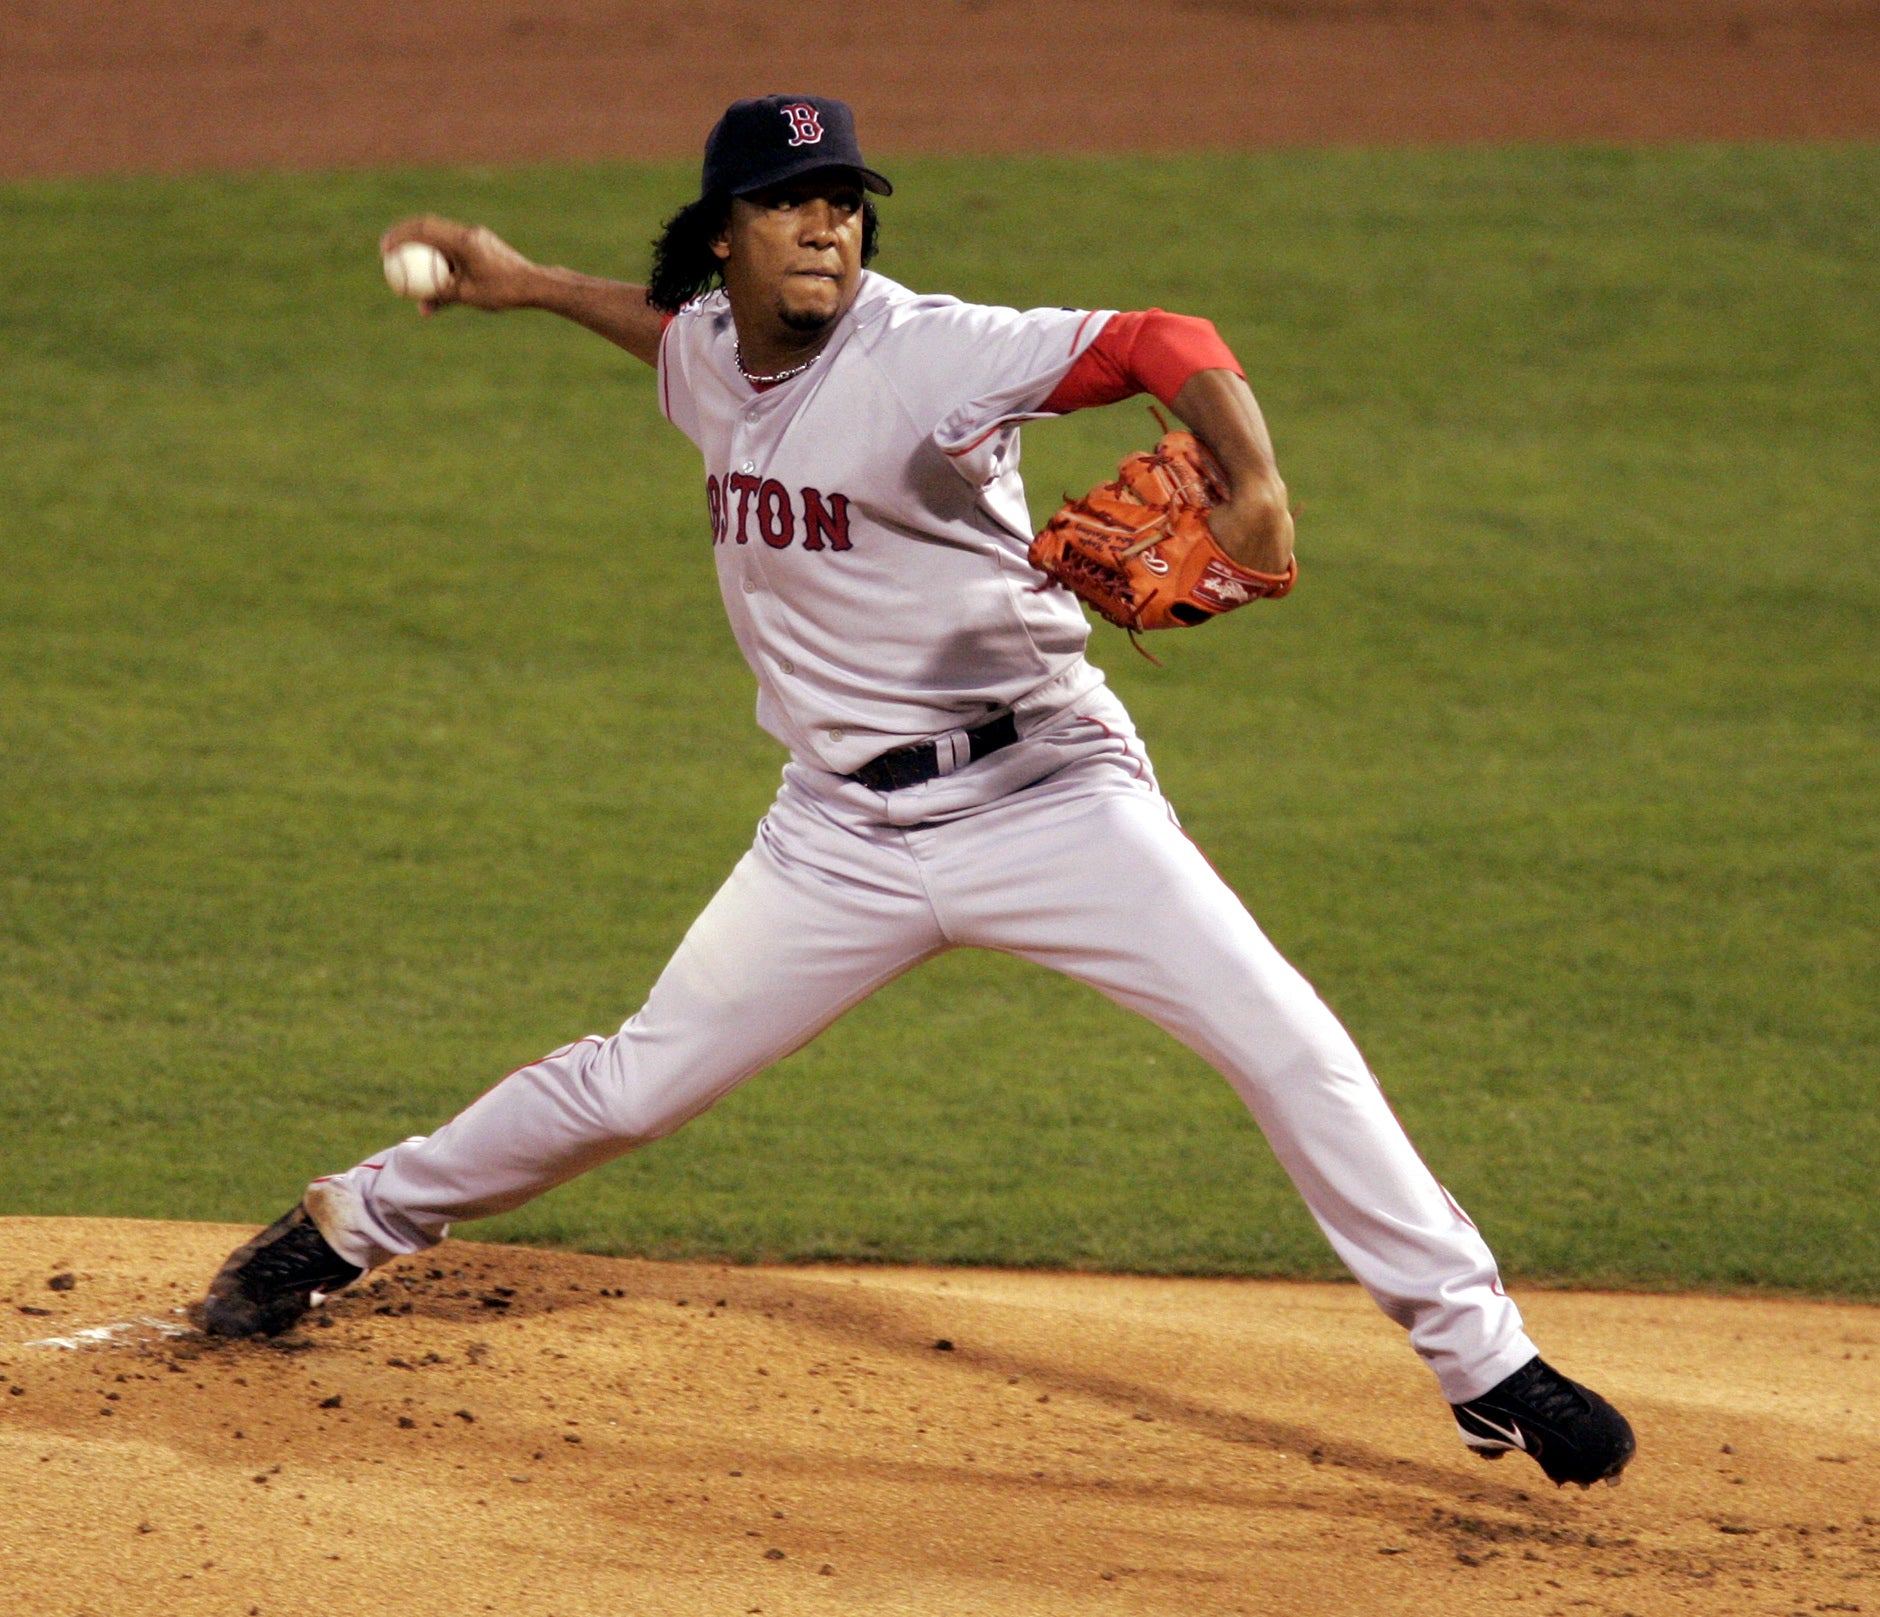 Pedro Martinez will pitch in a Cambridge 'oldtime' baseball game